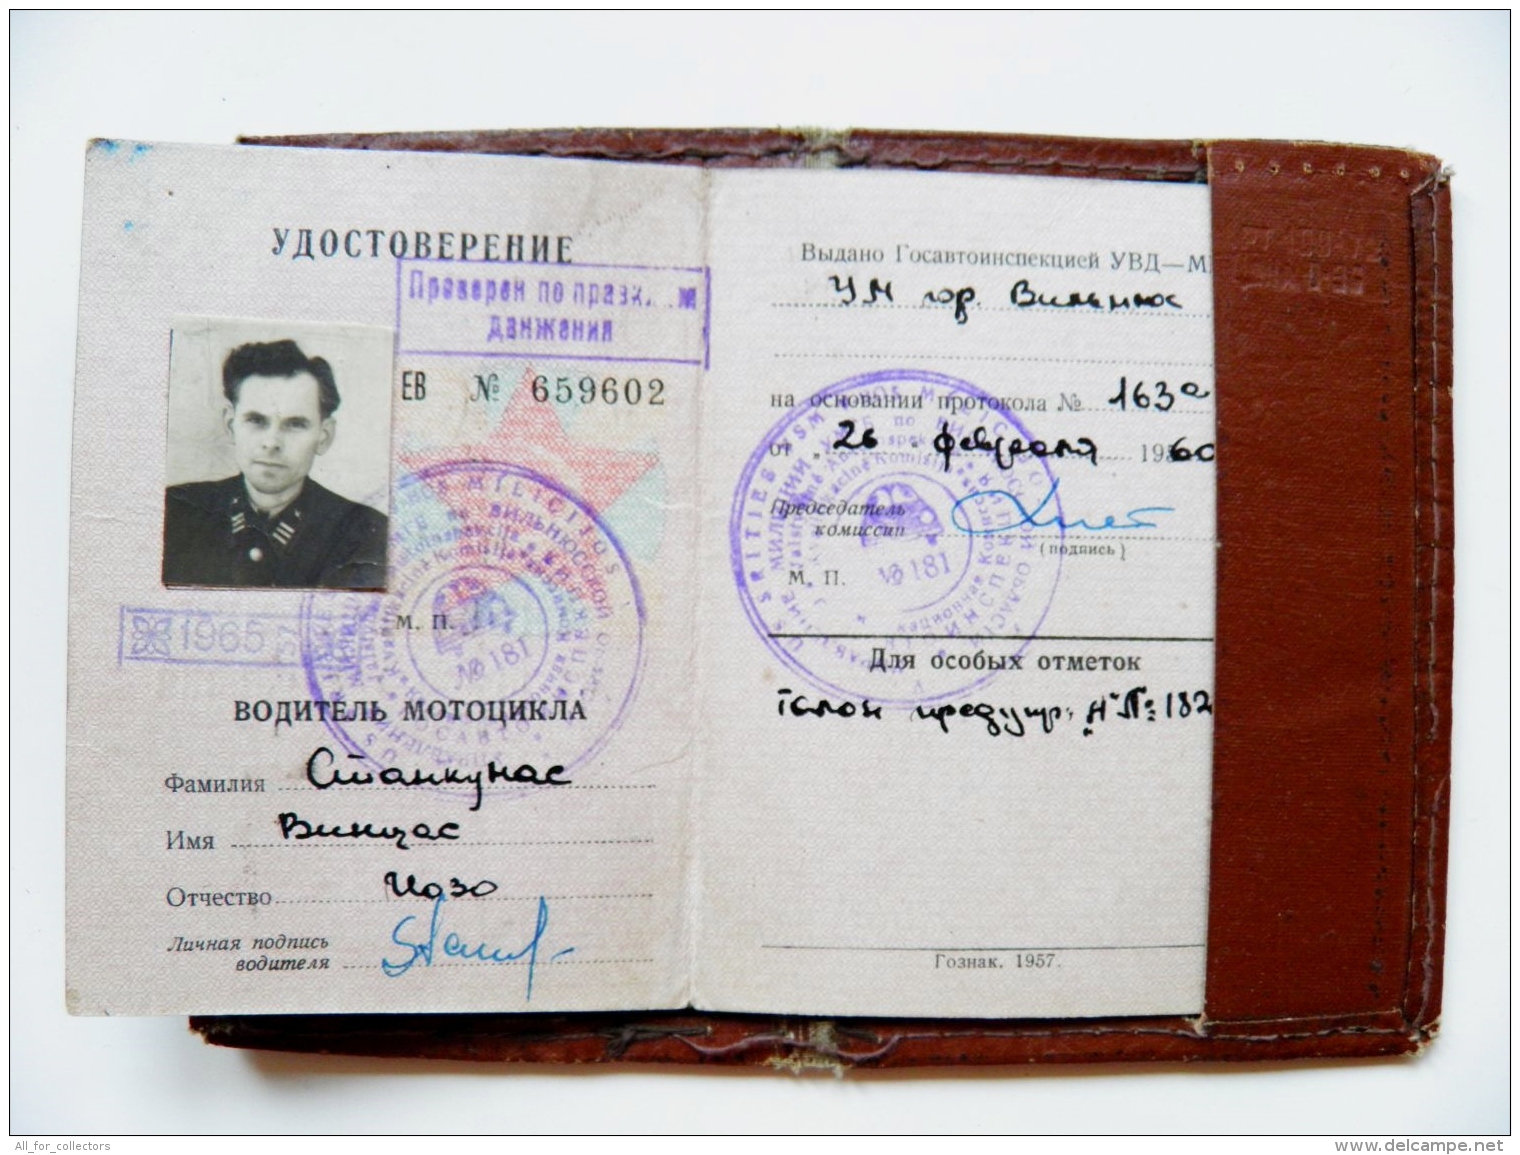 Old Motorbike Motorcycle Driving Driver'slicence From Ussr Lithuania 1960 With Old Skin Folder And Extra Warning Voucher - Documentos Históricos